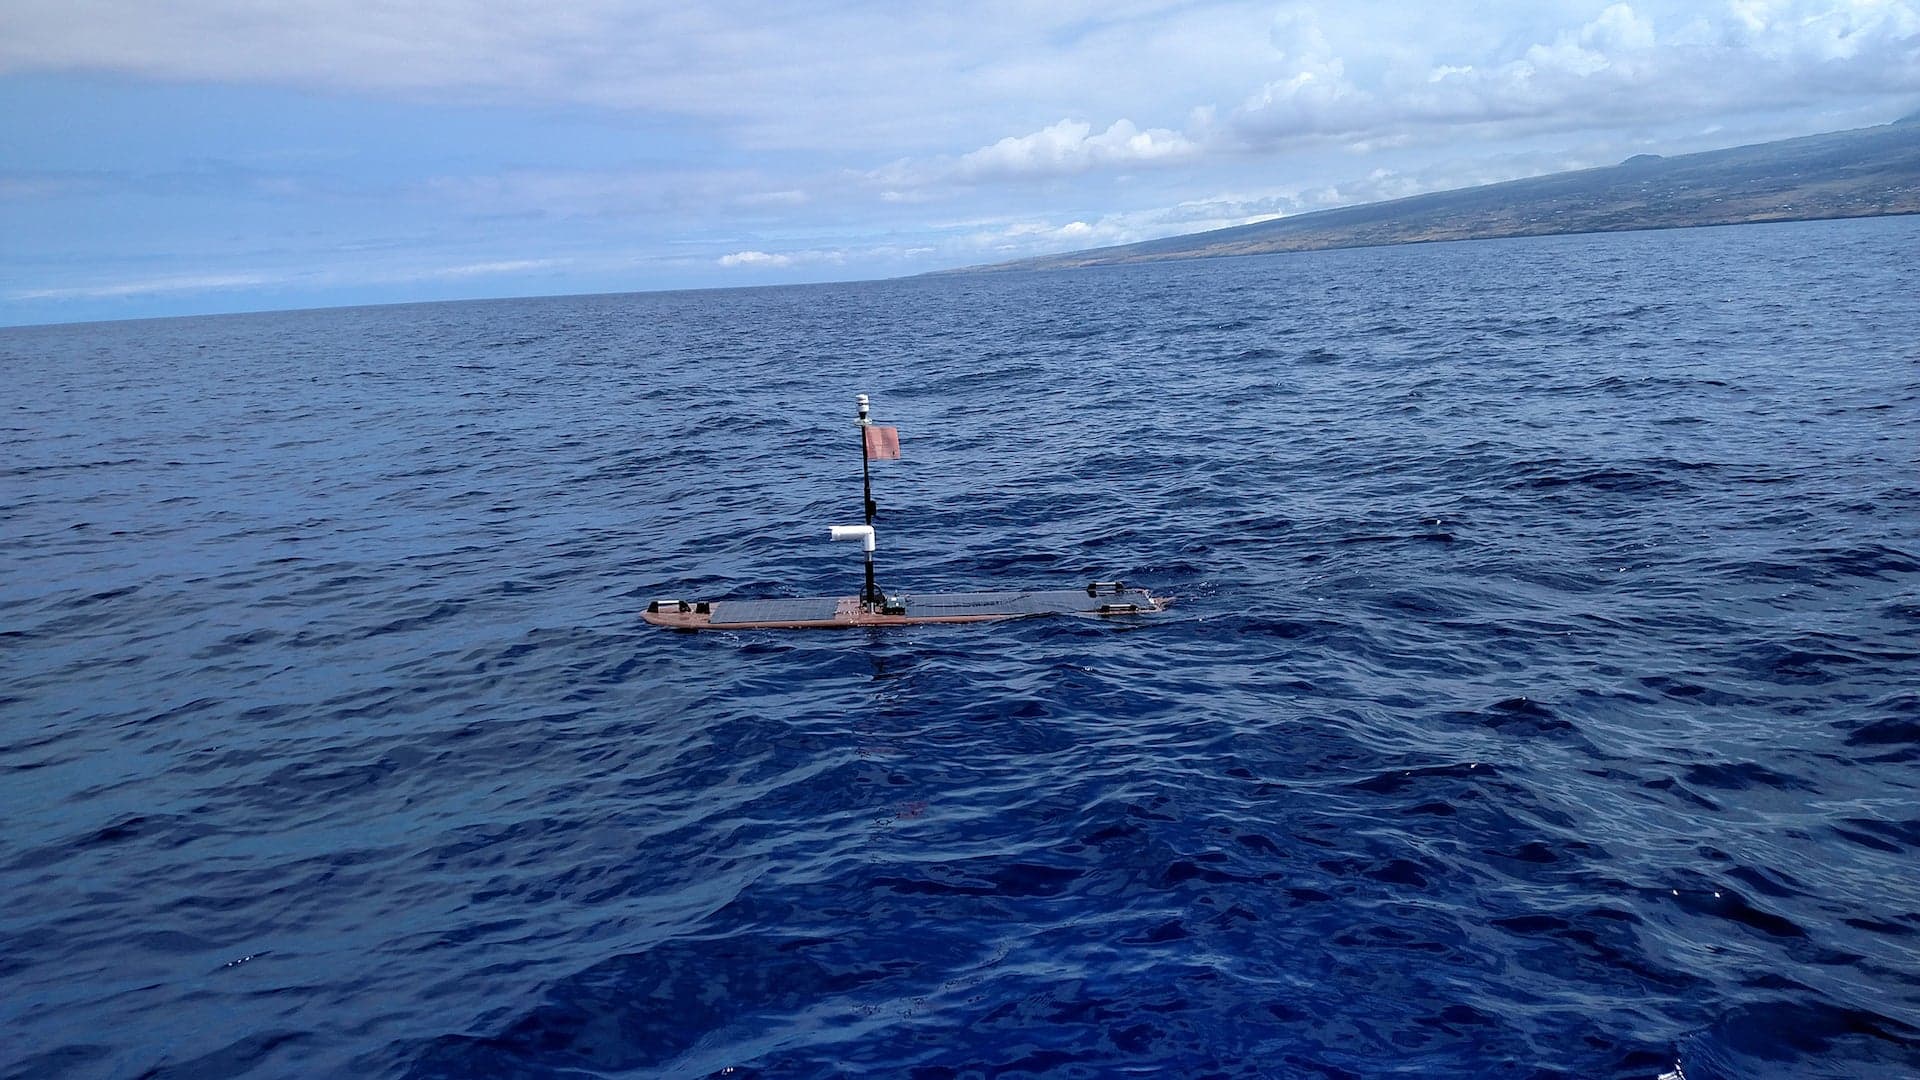 Wave Glider Drone Finishes 7-Day Great Barrier Reef Research Mission